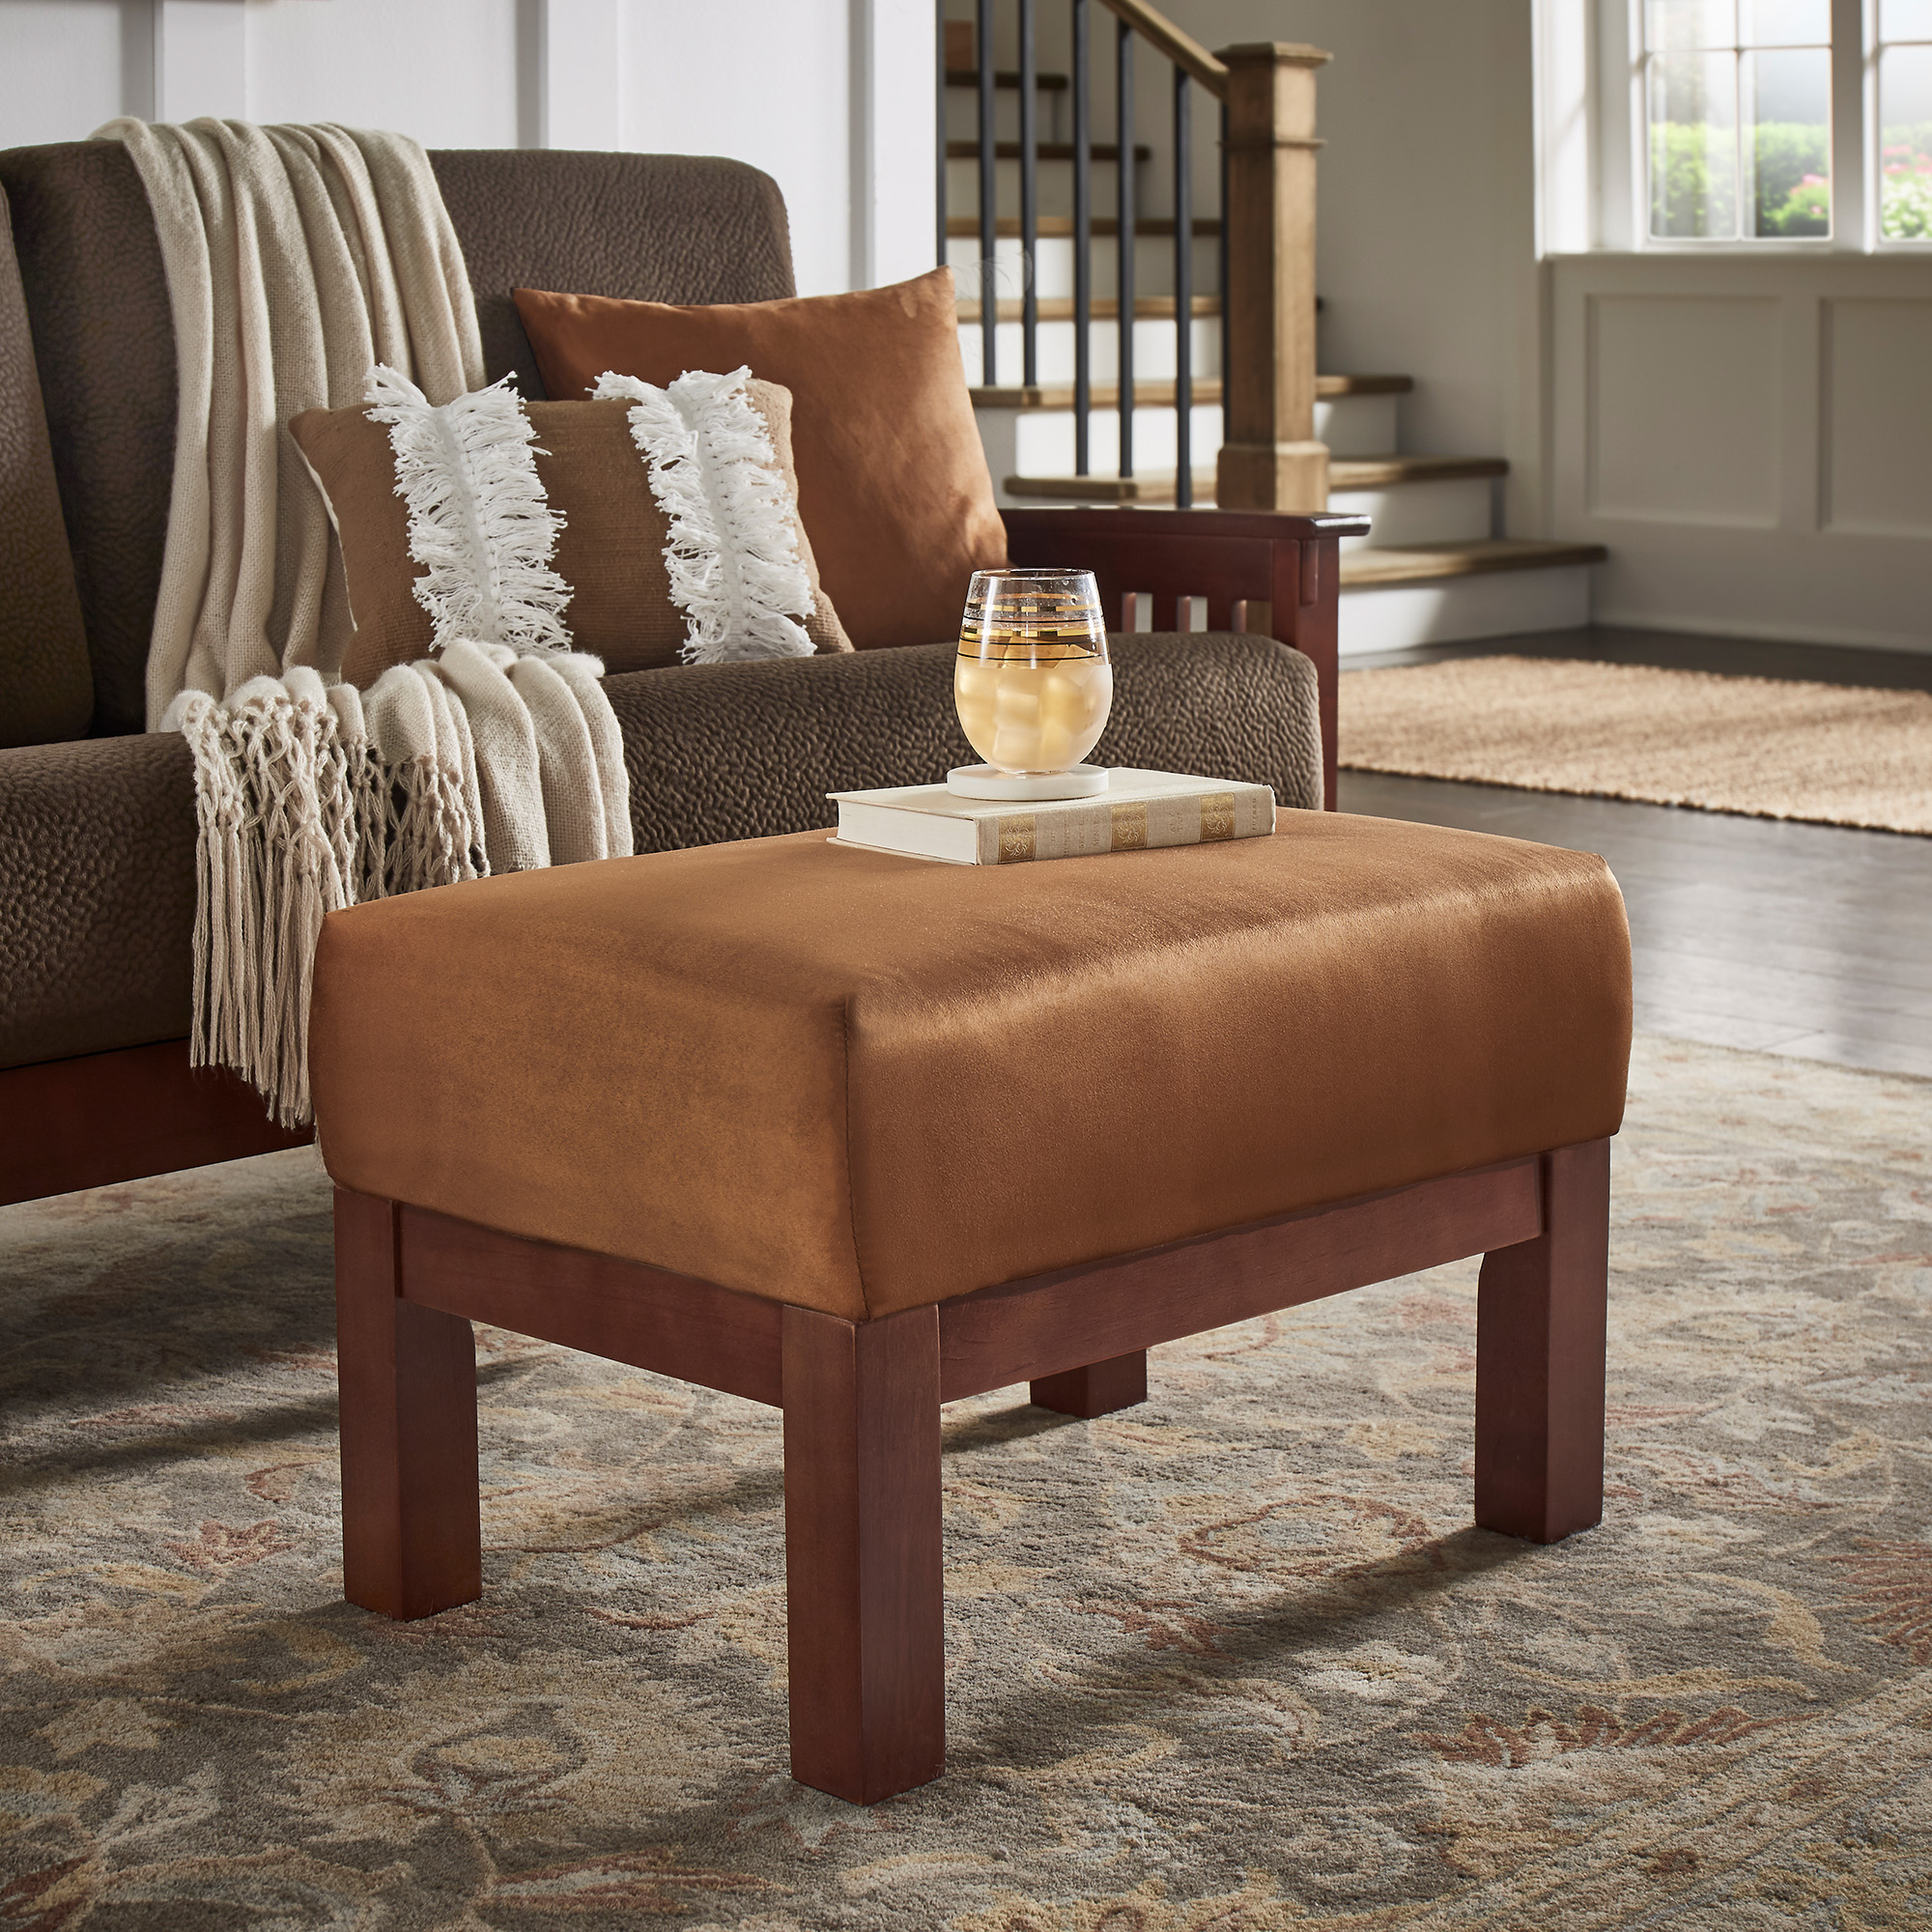 The final fabric we discuss is microfiber. Pictured here is the Mission-Style Oak Finish Wood Ottoman in Rust Microfiber Upholstery by iNSPIRE Q Classic. Perched atop the ottoman is a single book and a glass of iced tea.